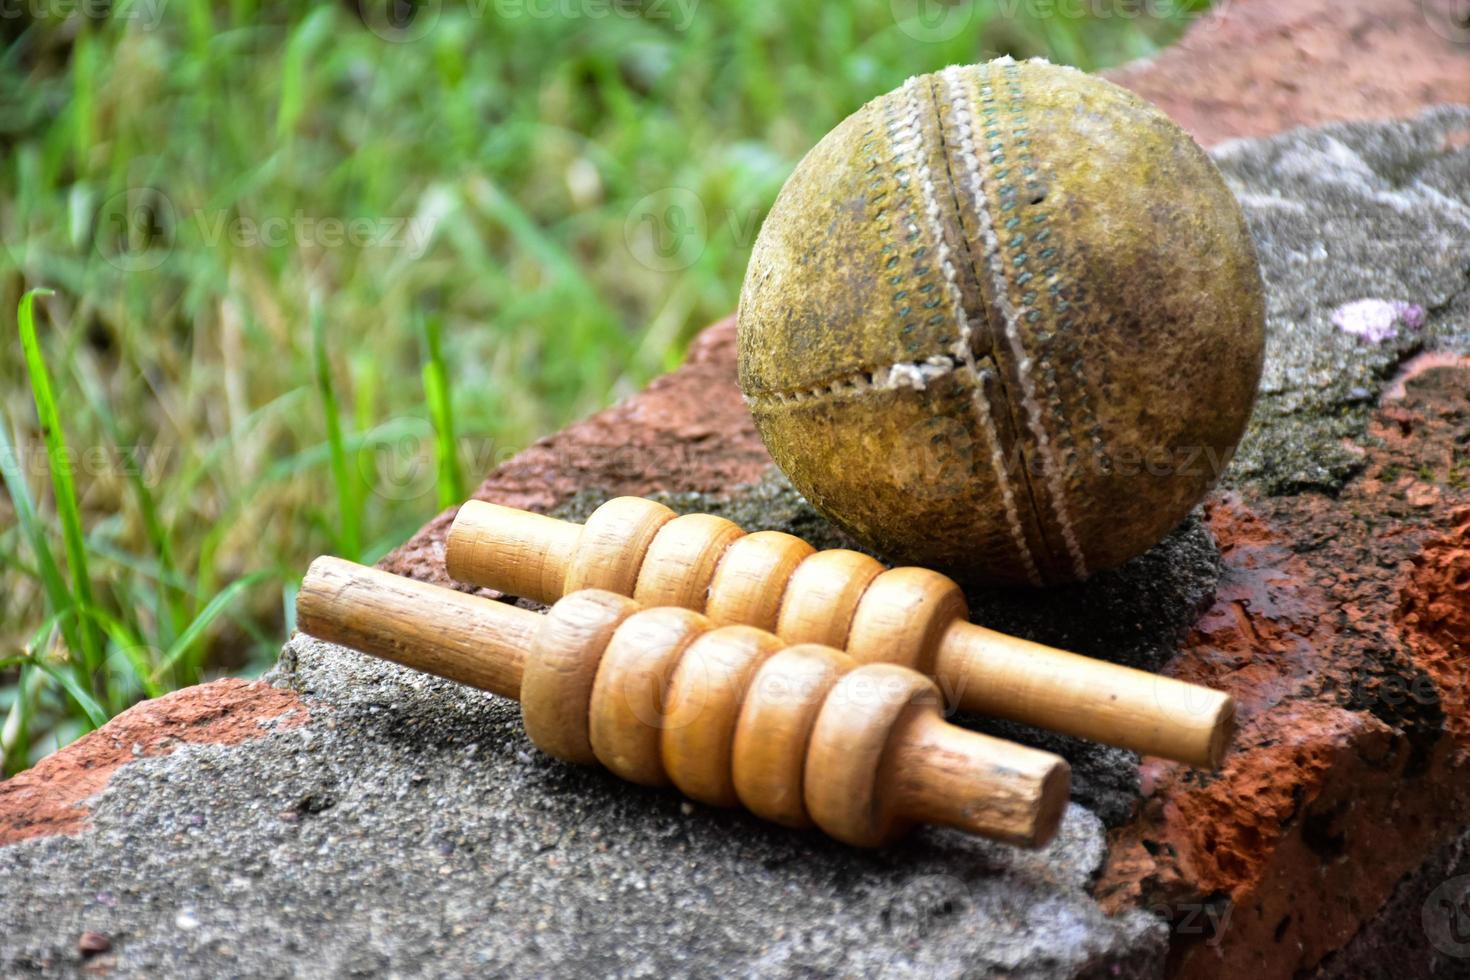 Cricket sport equipments on brick, bat, wicket, old leather ball, soft and selective focus. photo